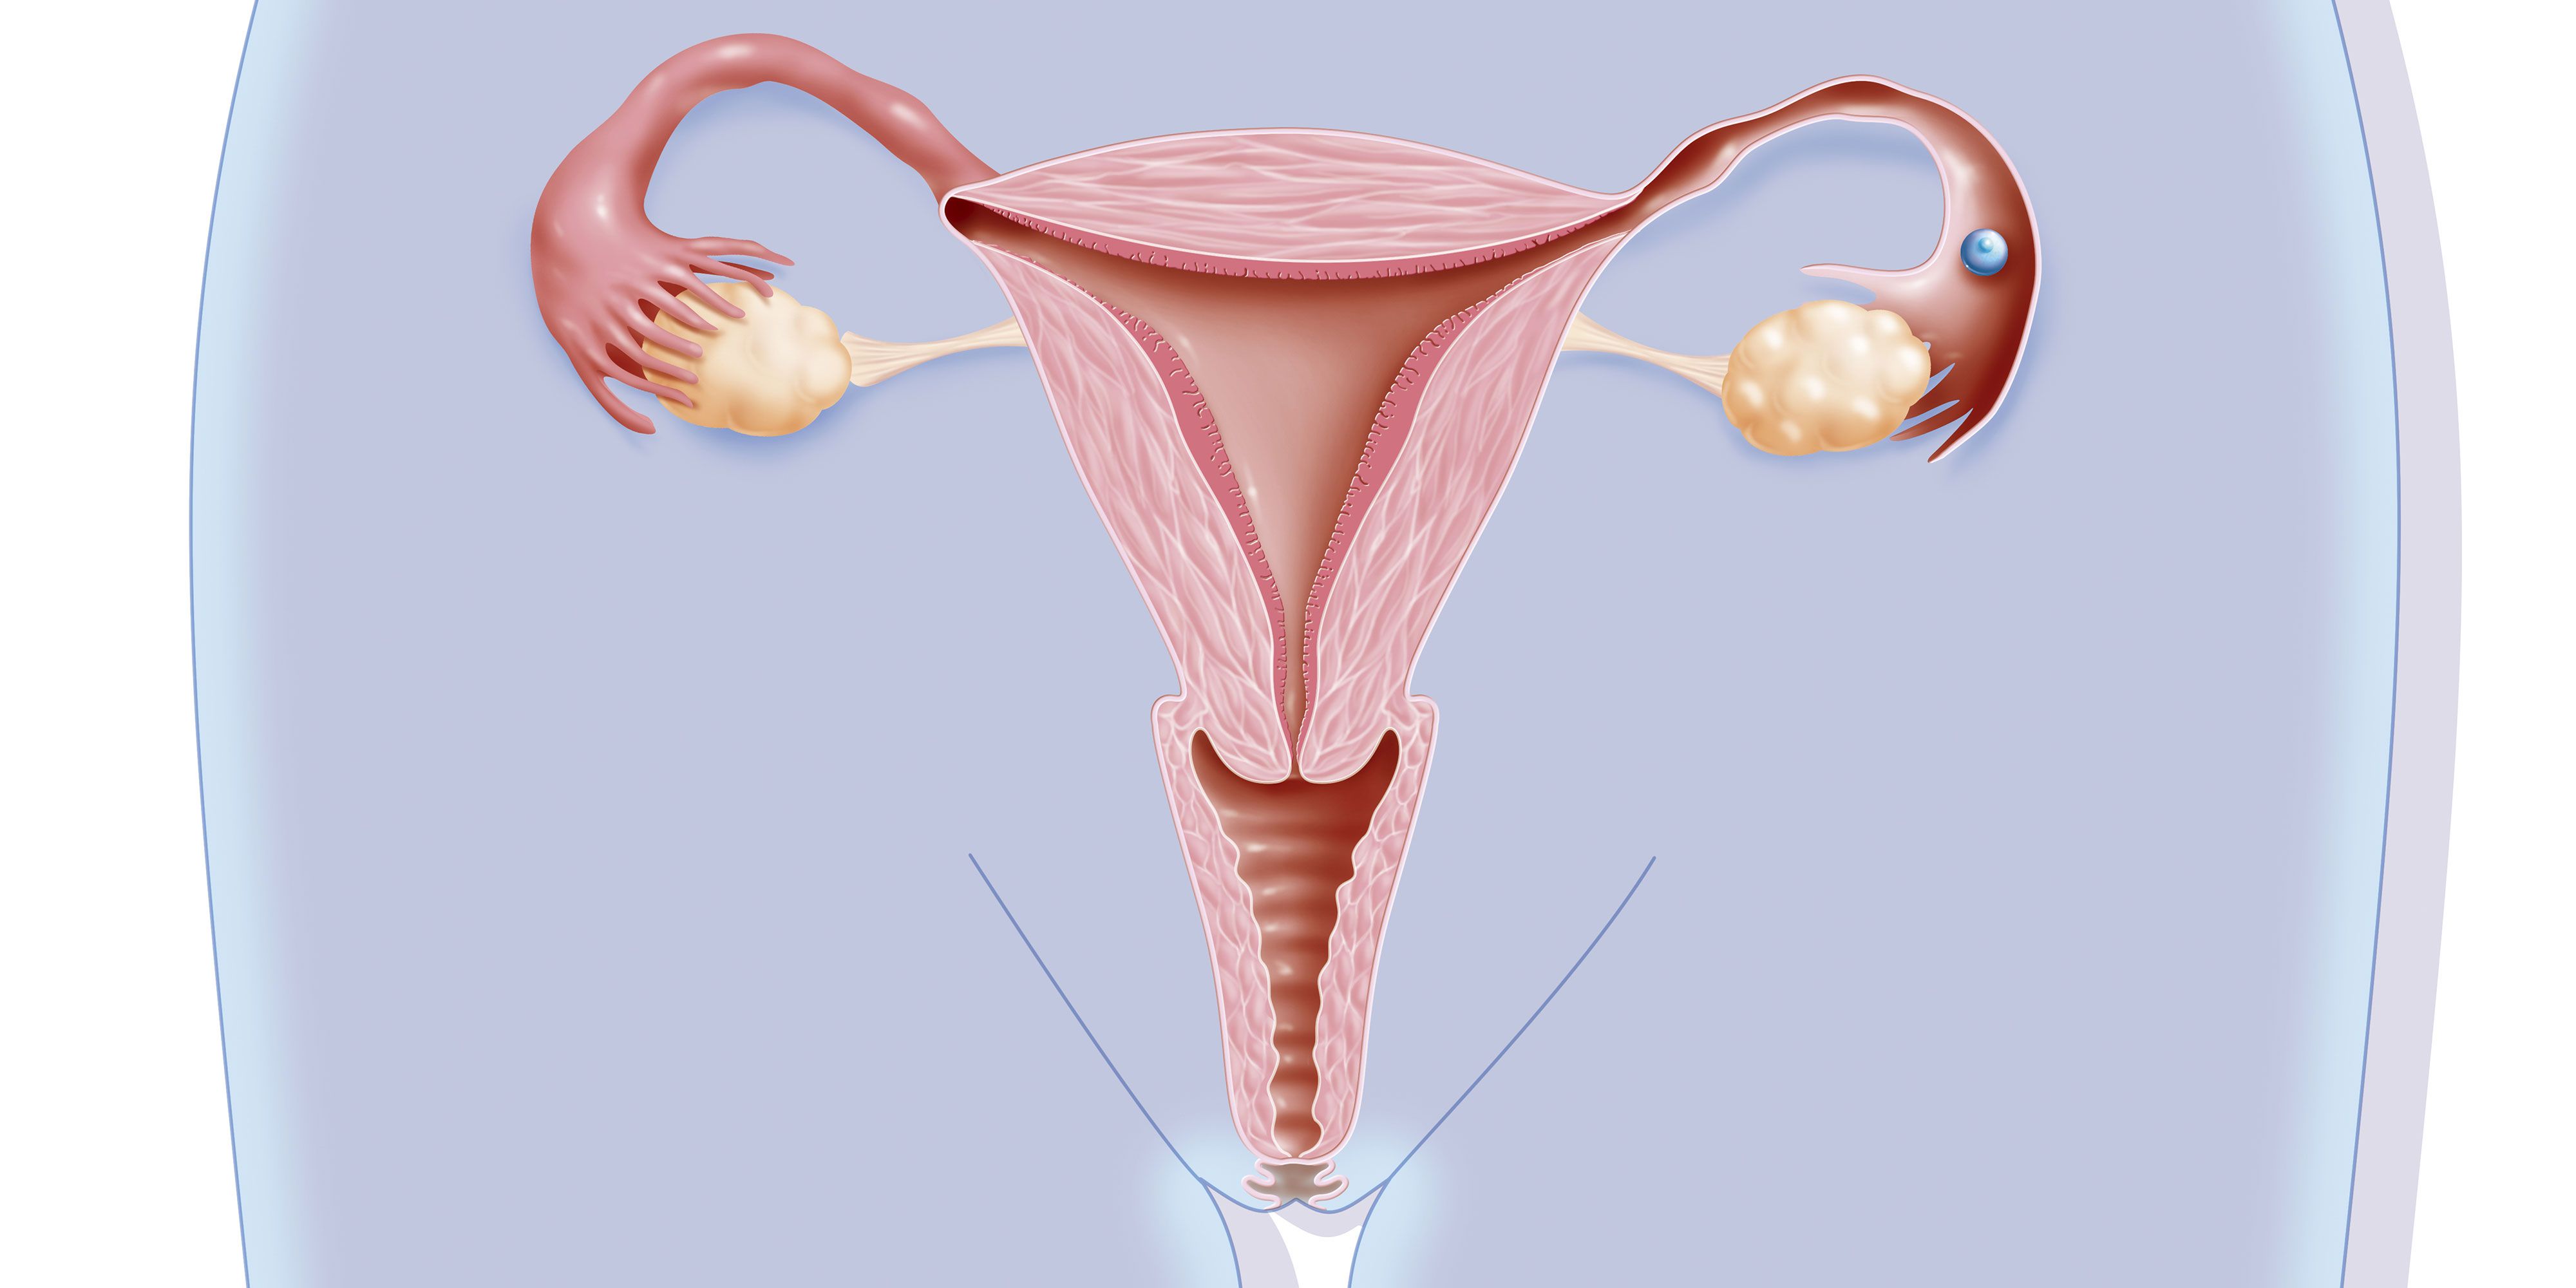 14-astounding-facts-about-vagina-female